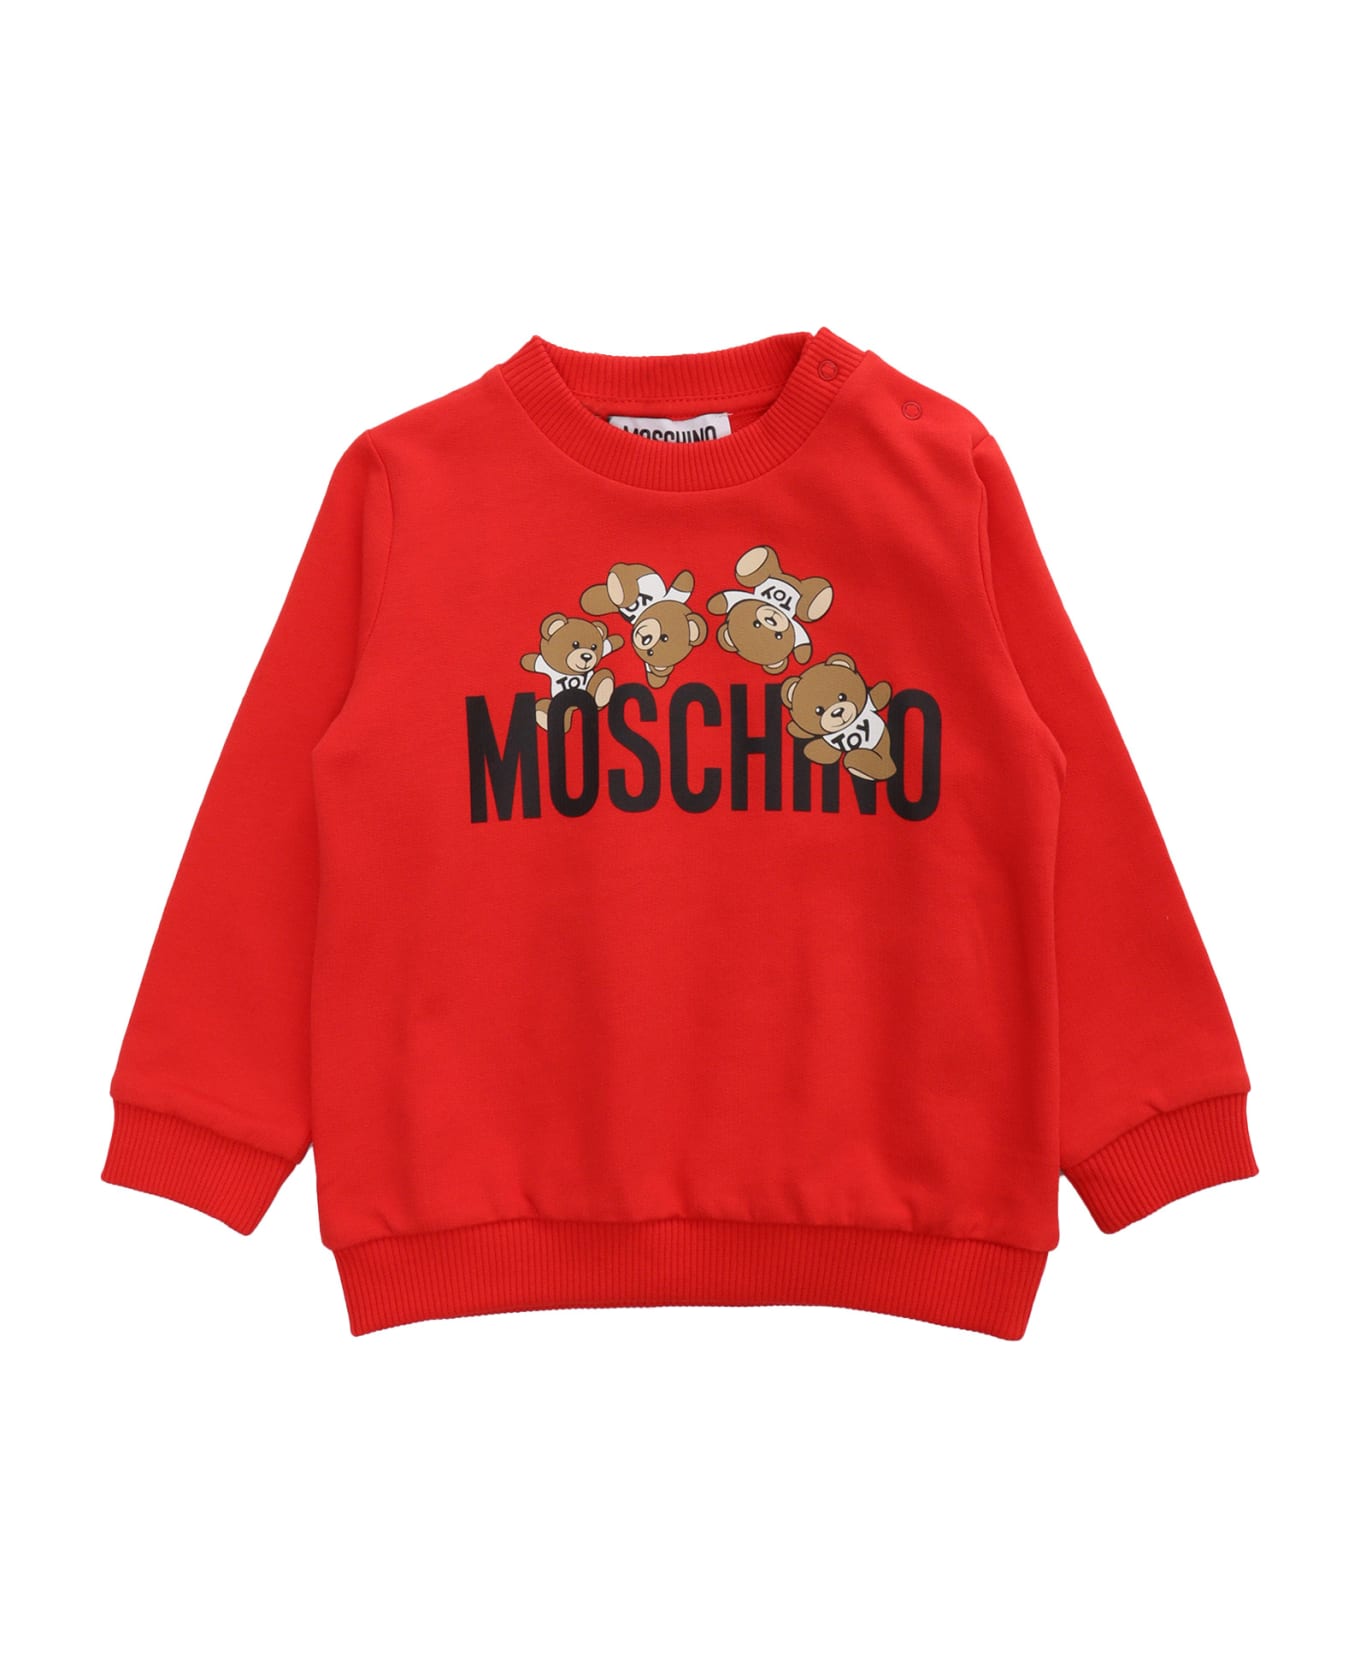 Moschino Red Sweatshirt With Print - RED